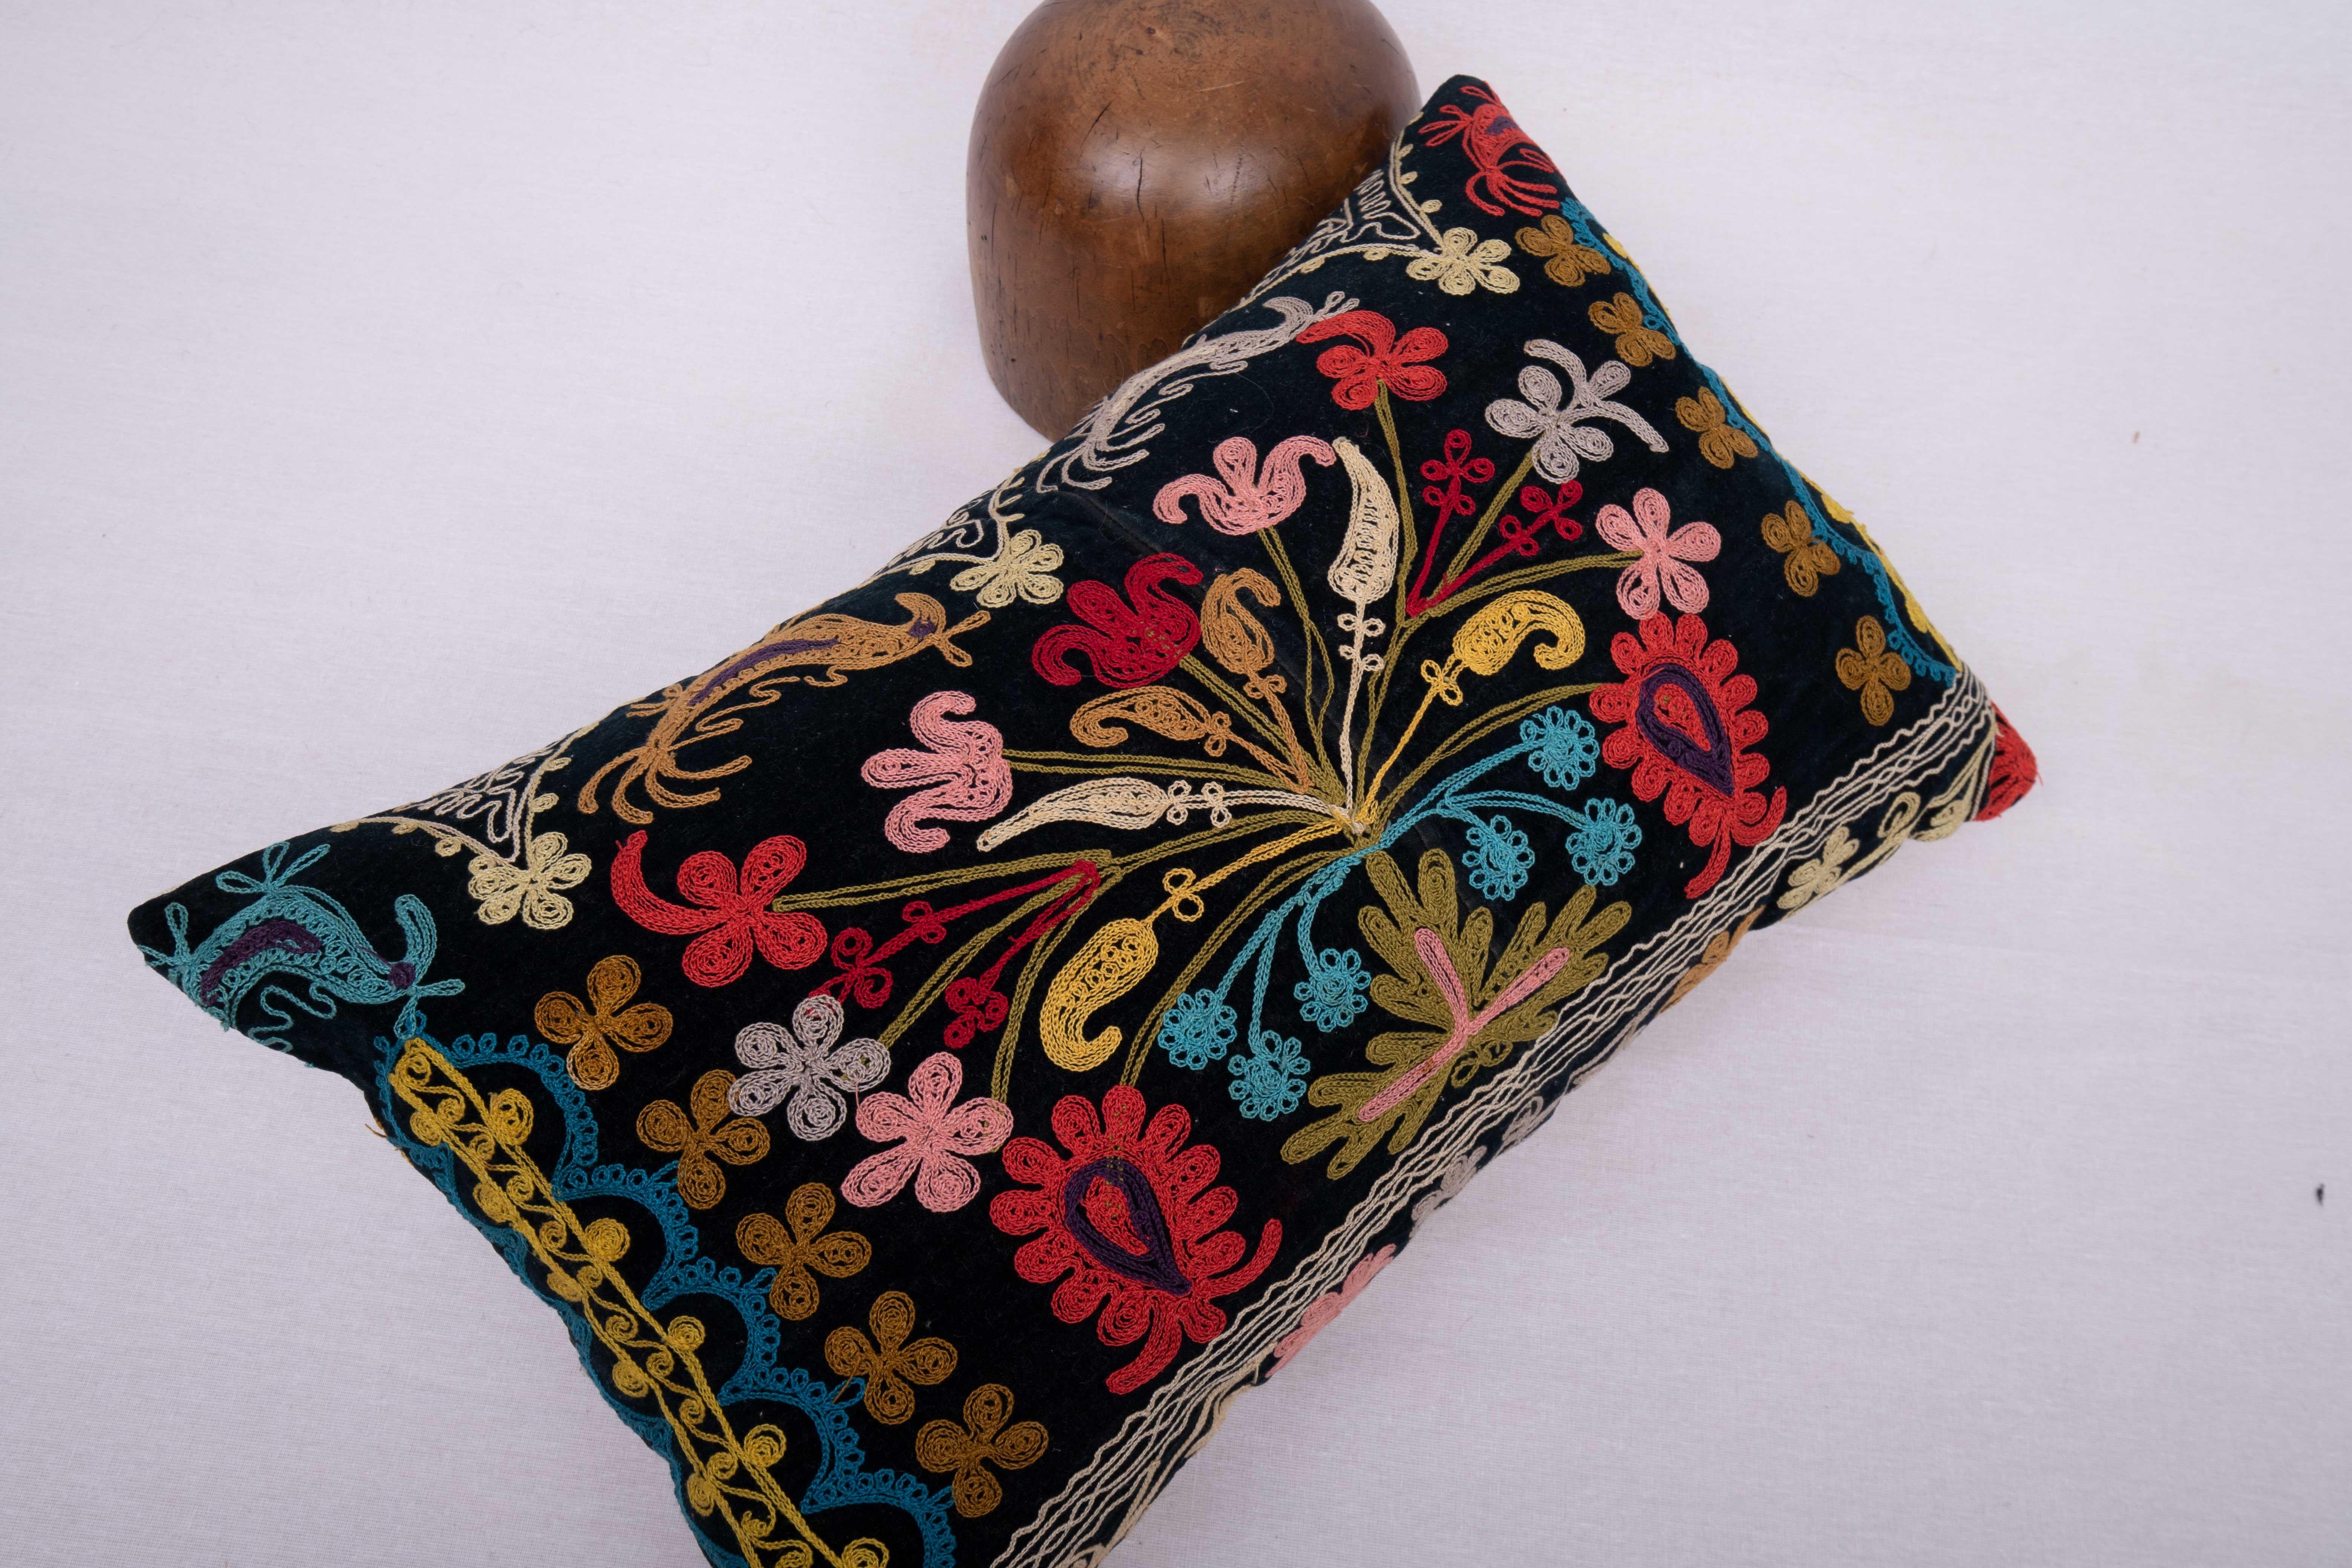 Embroidered Suzani Pillow Cover Made from a Vintage Velvet Suzani For Sale